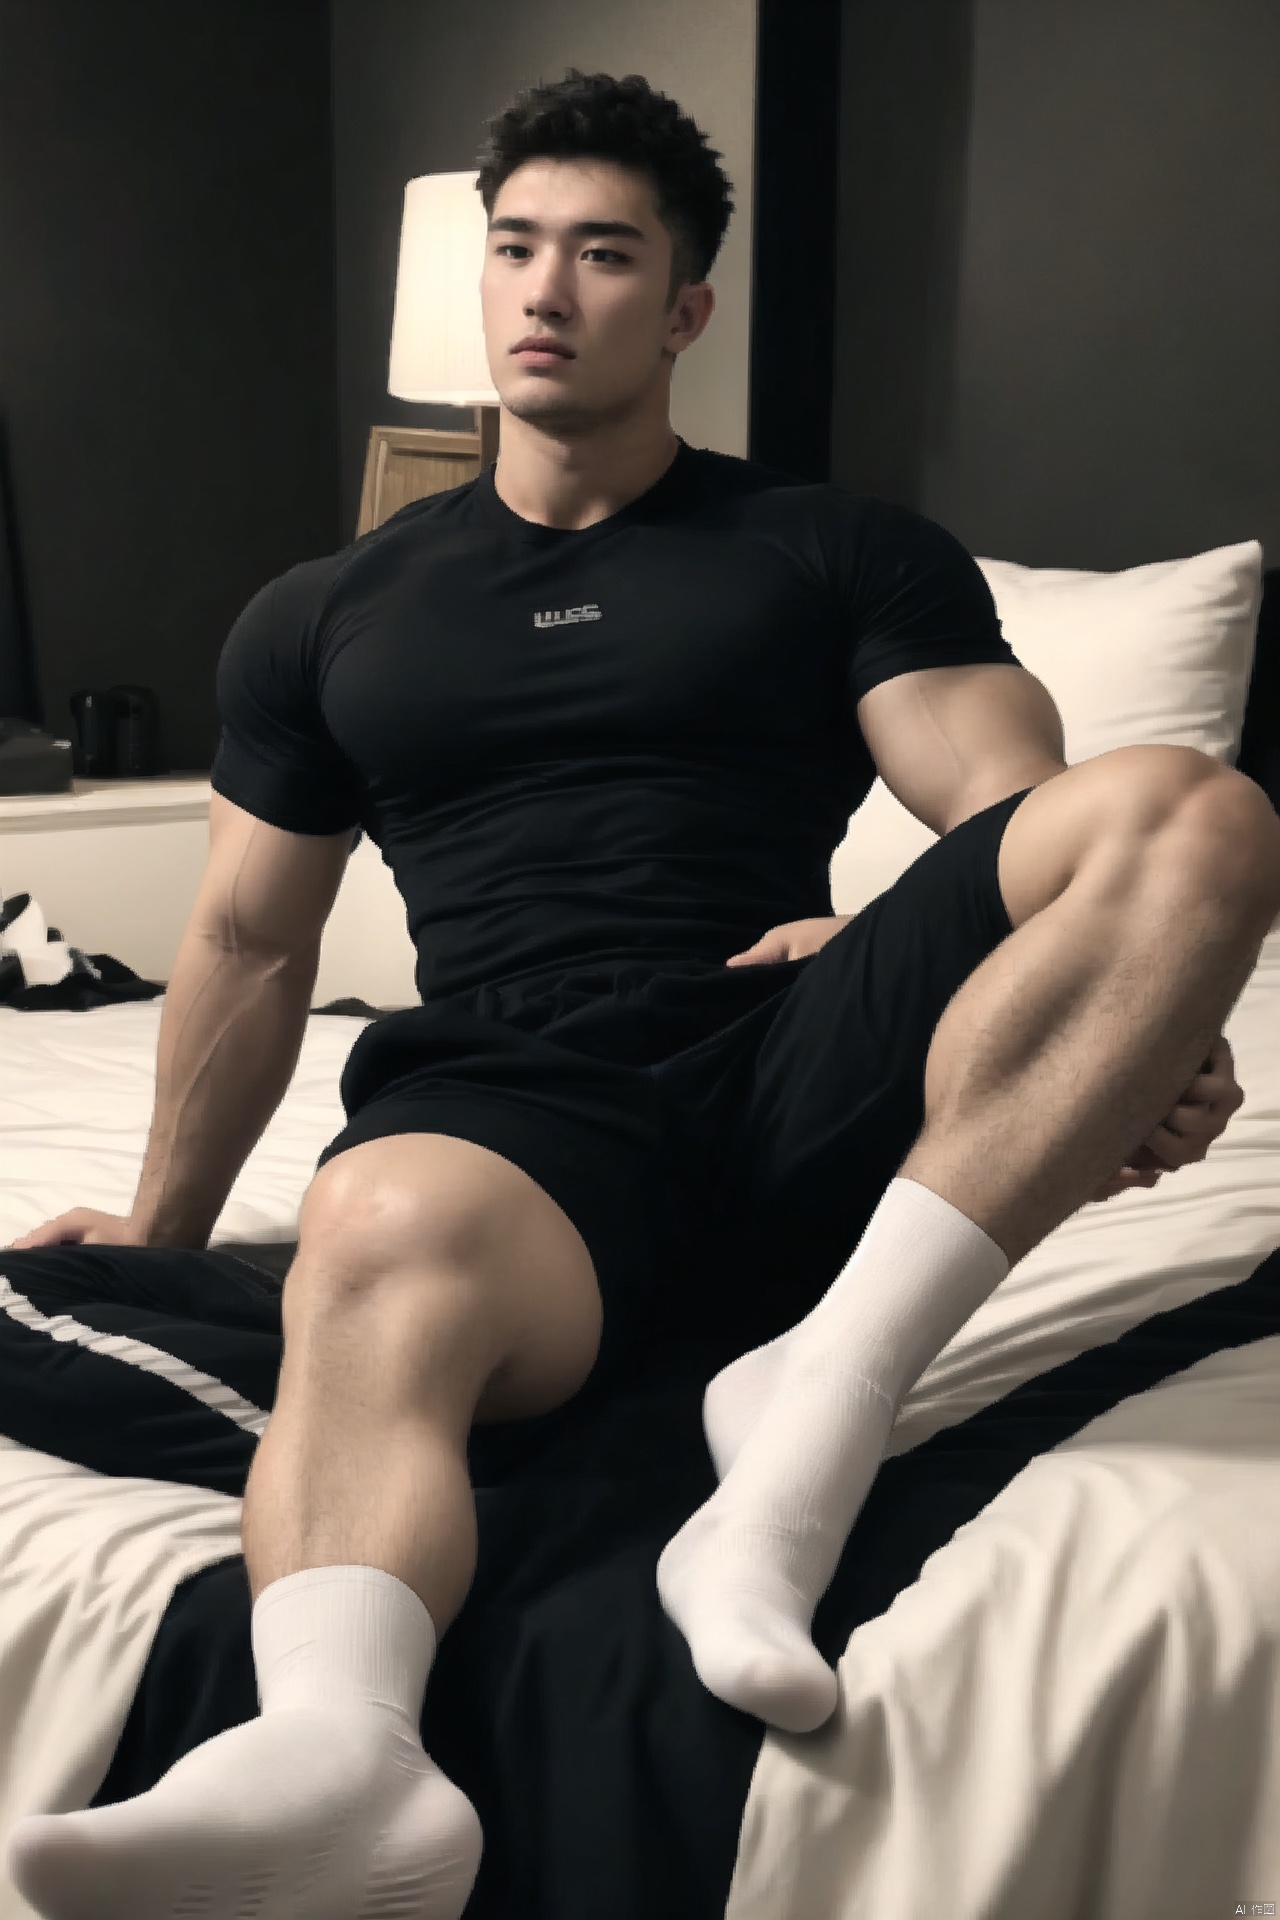  1 Male, Male Focus, (Representative, Realistic, Fine, High Detail, Professional), Asian, Fine features, Handsome, Muscular, Chest hair, Fitness, tight clothes, white socks, full lens, soft light, blurry, lying in bed,black hair,male focus,(masterpiece, Realism, best quality, highly detailed,profession),asian,exquisite facial features,handsome,muscular,chest hair,fitness,tight clothes,black ,full shot,soft lighting,blurry,(wearing black short sleeves and black shorts), young muscular male youth, strong male handsome youth, official art, a realistic painting, surrealism, a 20 - year-old male youth, a strong male, [inch head short hair], a muscular man, muscle contour, muscle shadow, male model face, male model's body proportion, male model's body shape, strong youth, deep eyes, exquisite and perfect facial features, (crotch uplift), real, full of details, he was tall and strong, 180 sports students, handsome Asian guy, deep sockets, the high bridge of the nose, [big eyes, handsome guy, young, strong, male], tall and strong, wearing short black sleeves, black underbody shorts, with black socks on his feet, expose your whole body, 180 long-legged sports students, the whole body, [(Arm is normally placed on the side, normal foot type, normal foot shape, the arm is normally down, tuck in, arms on both sides), ]， mature, young, male, young, strong, male, handsome, light versus shadow portrayal, [well-proportioned muscle contours of the legs, complete hands, ]，
